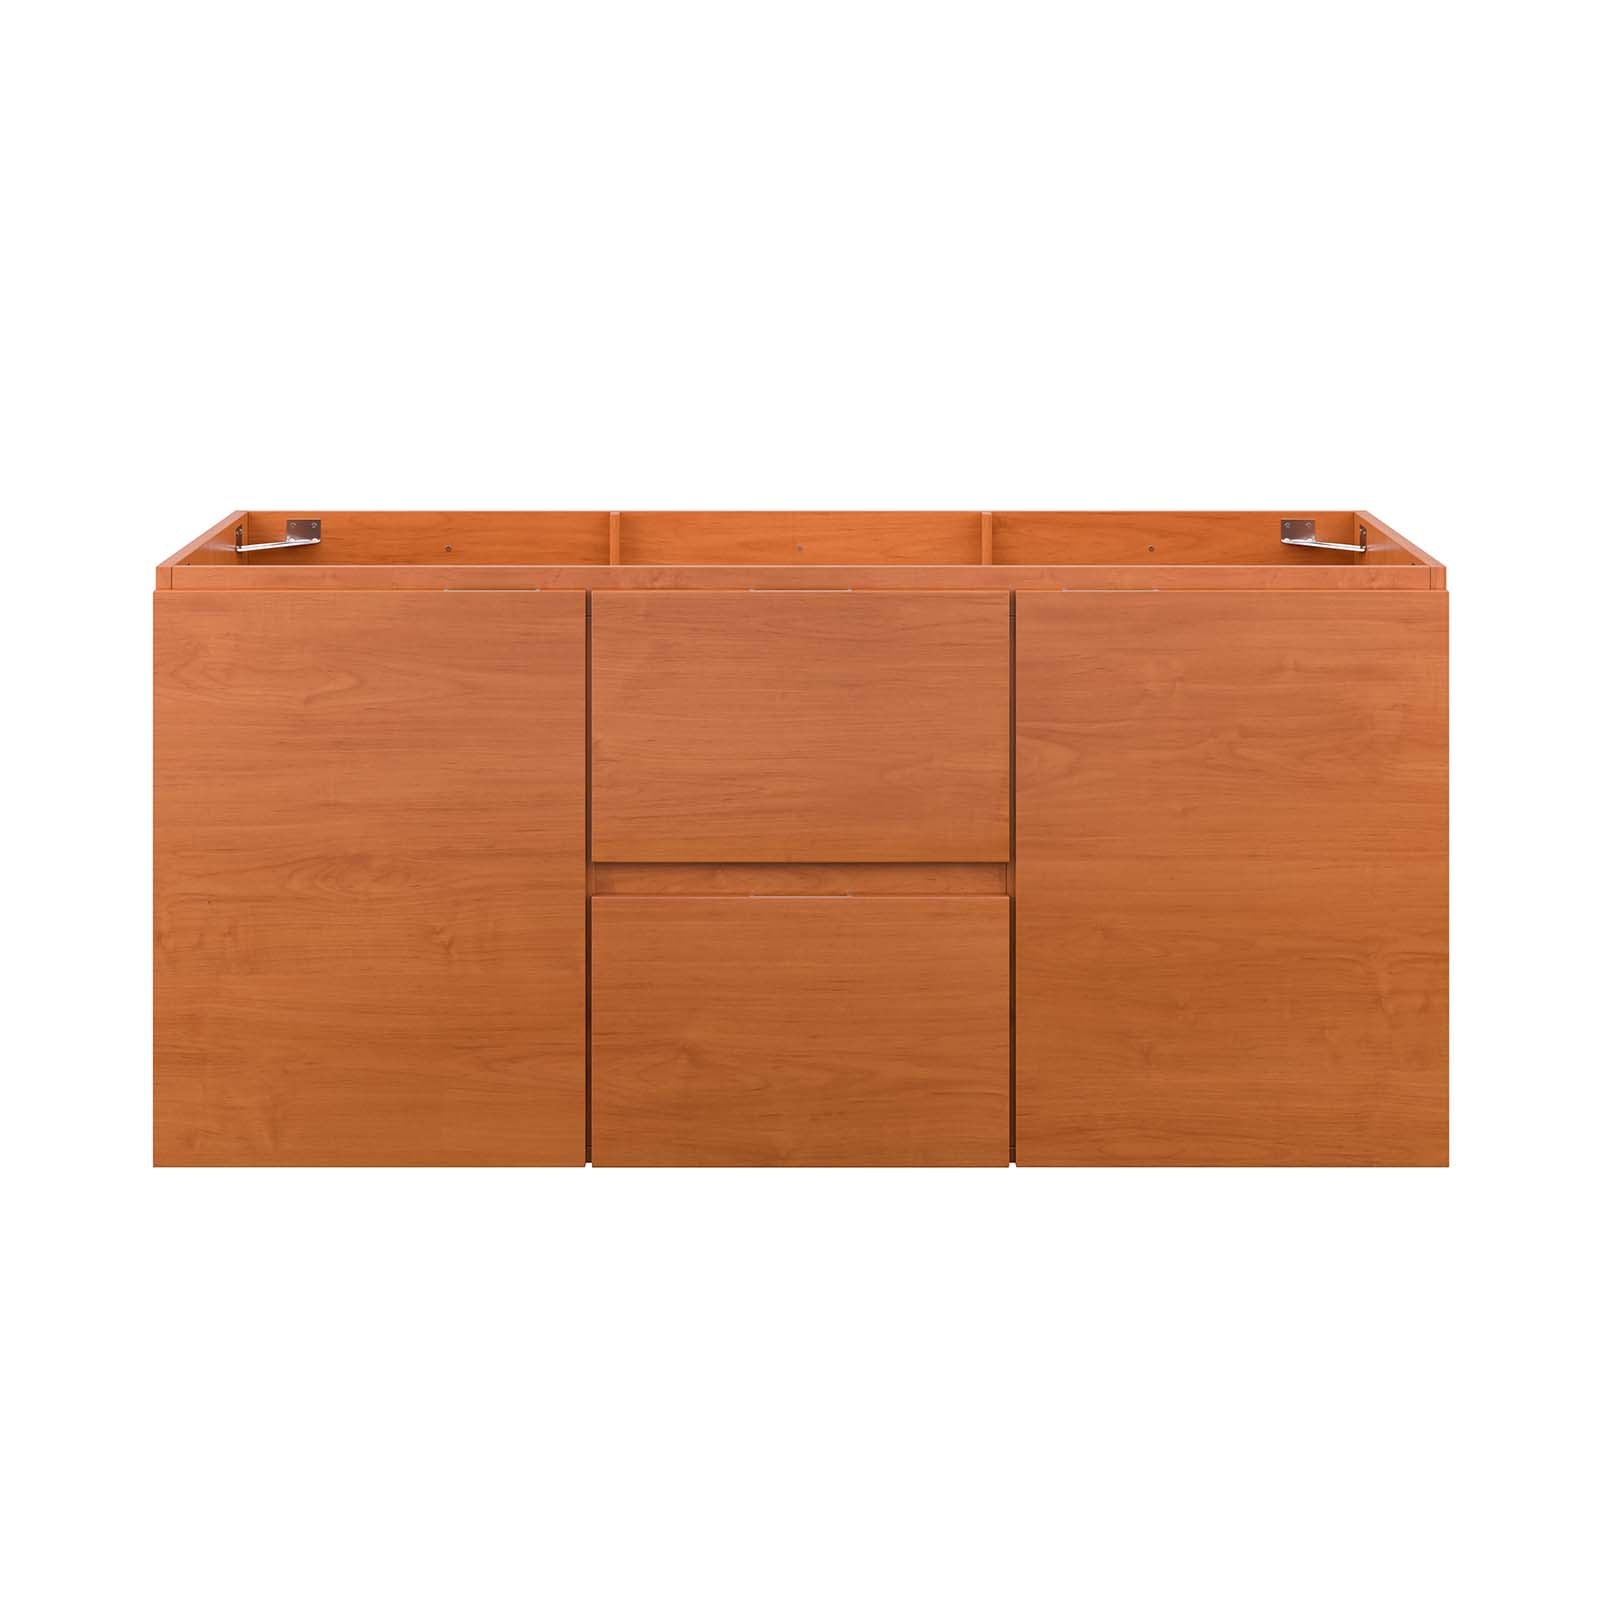 Scenic 48" Single Wall-Mount Bathroom Vanity Cabinet (Sink Basin Not Included) - East Shore Modern Home Furnishings